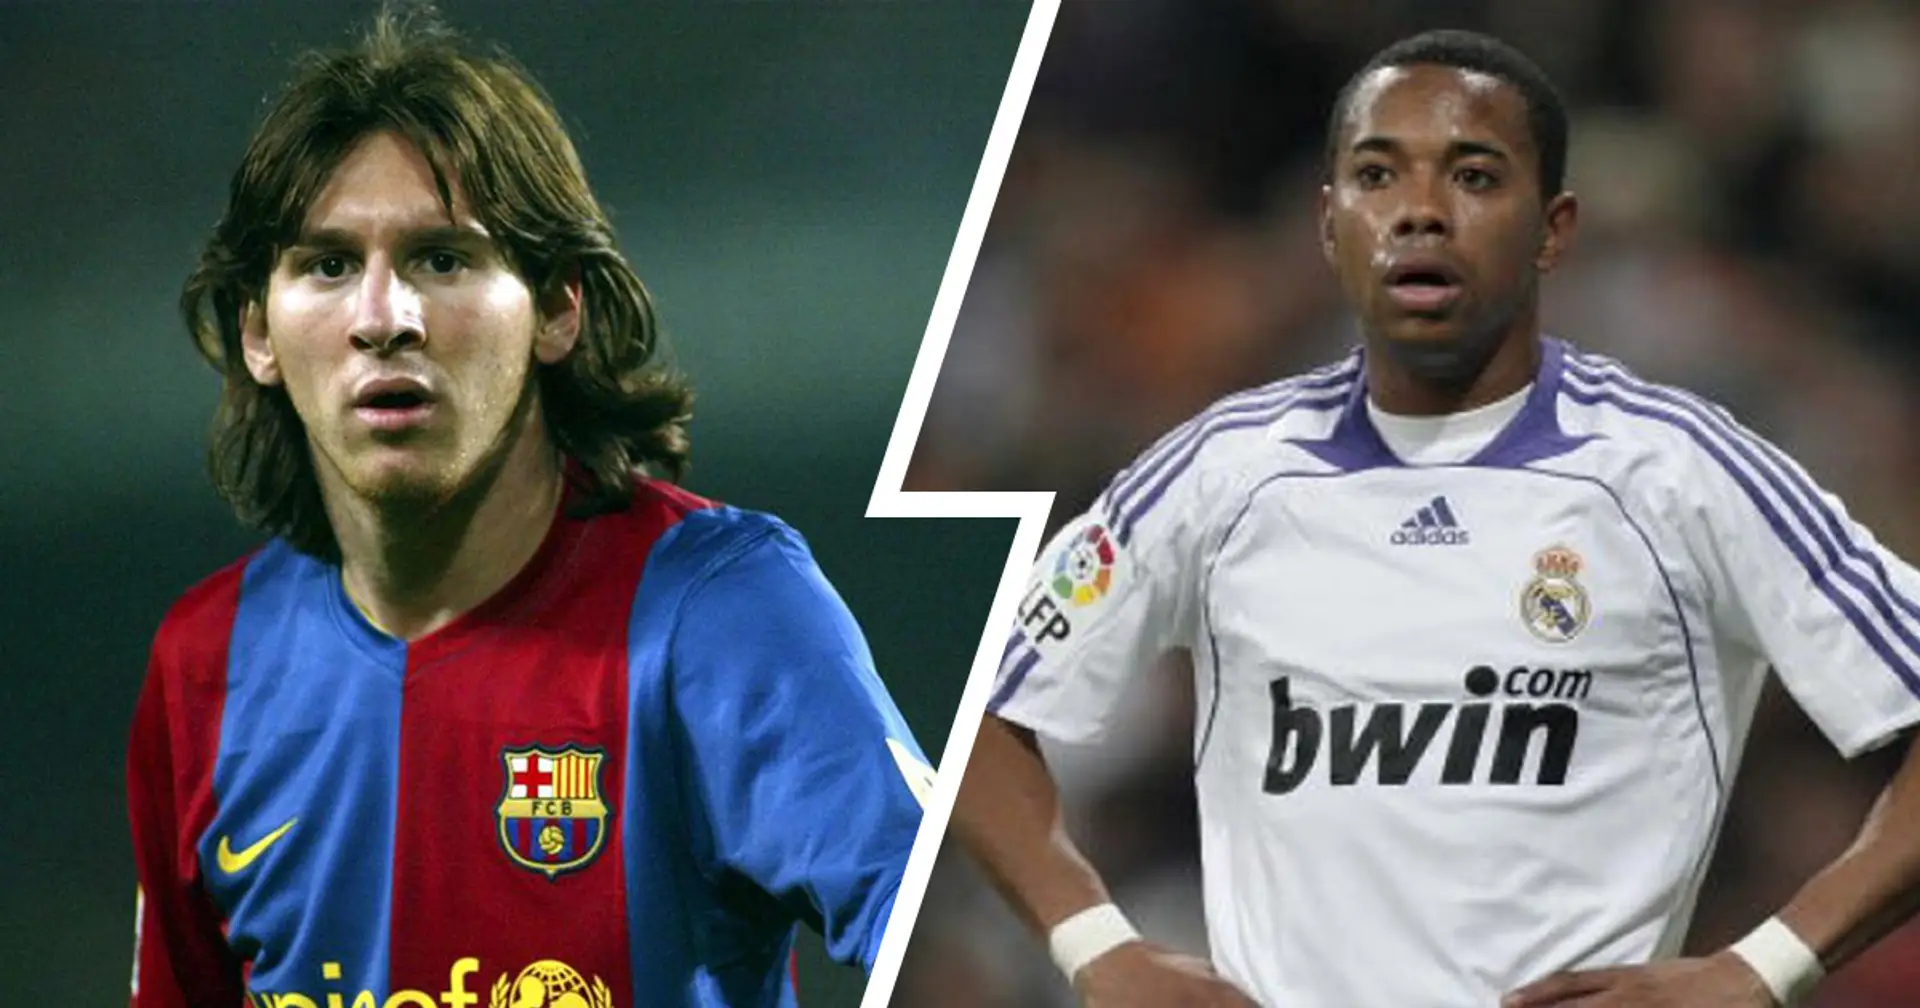 'I doubt Messi can make it at Barca': How Real Madrid fans tried to tell future by comparing Messi to Robinho in 2005